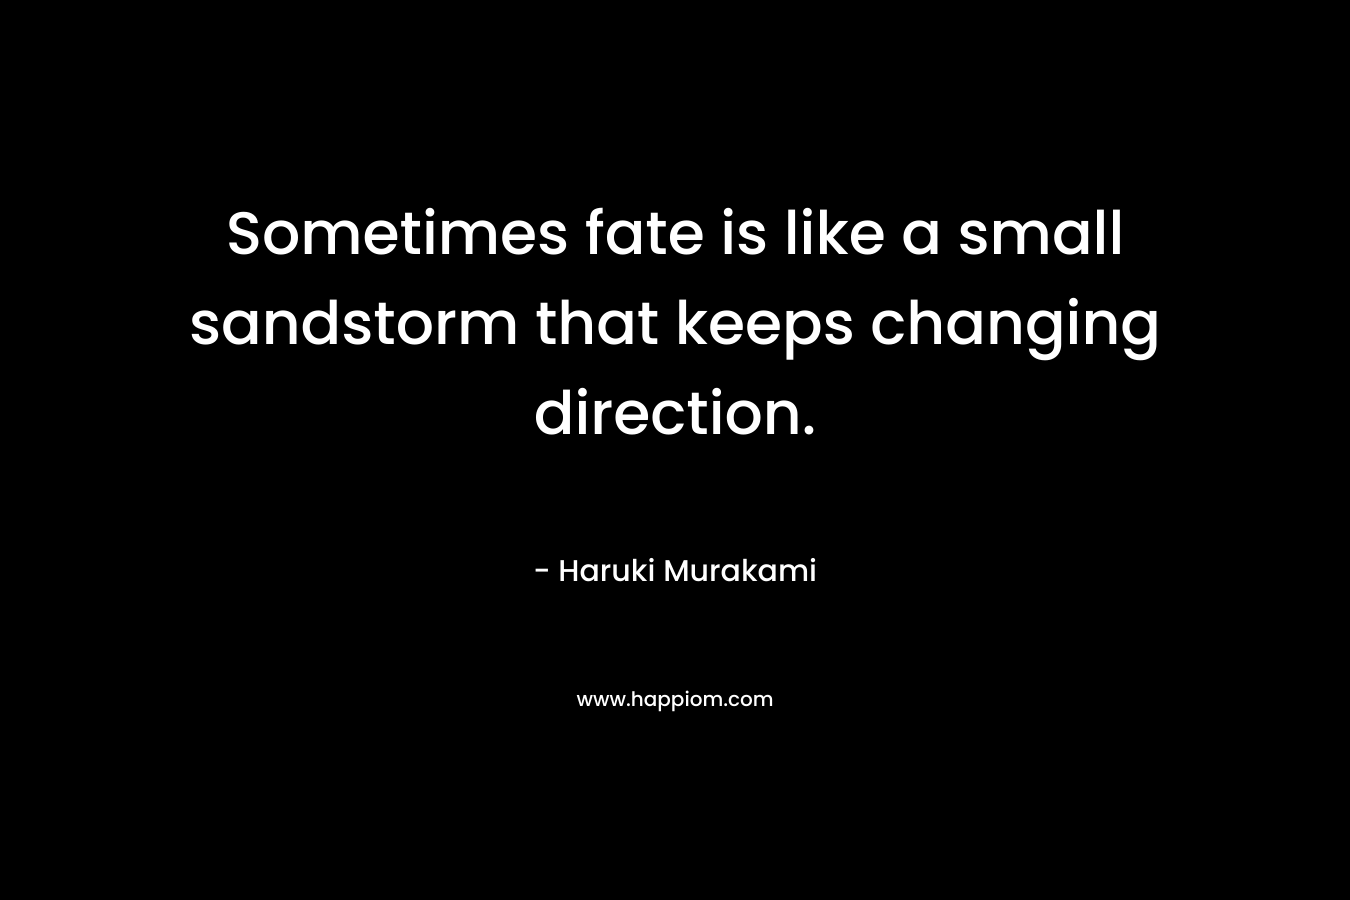 Sometimes fate is like a small sandstorm that keeps changing direction. – Haruki Murakami